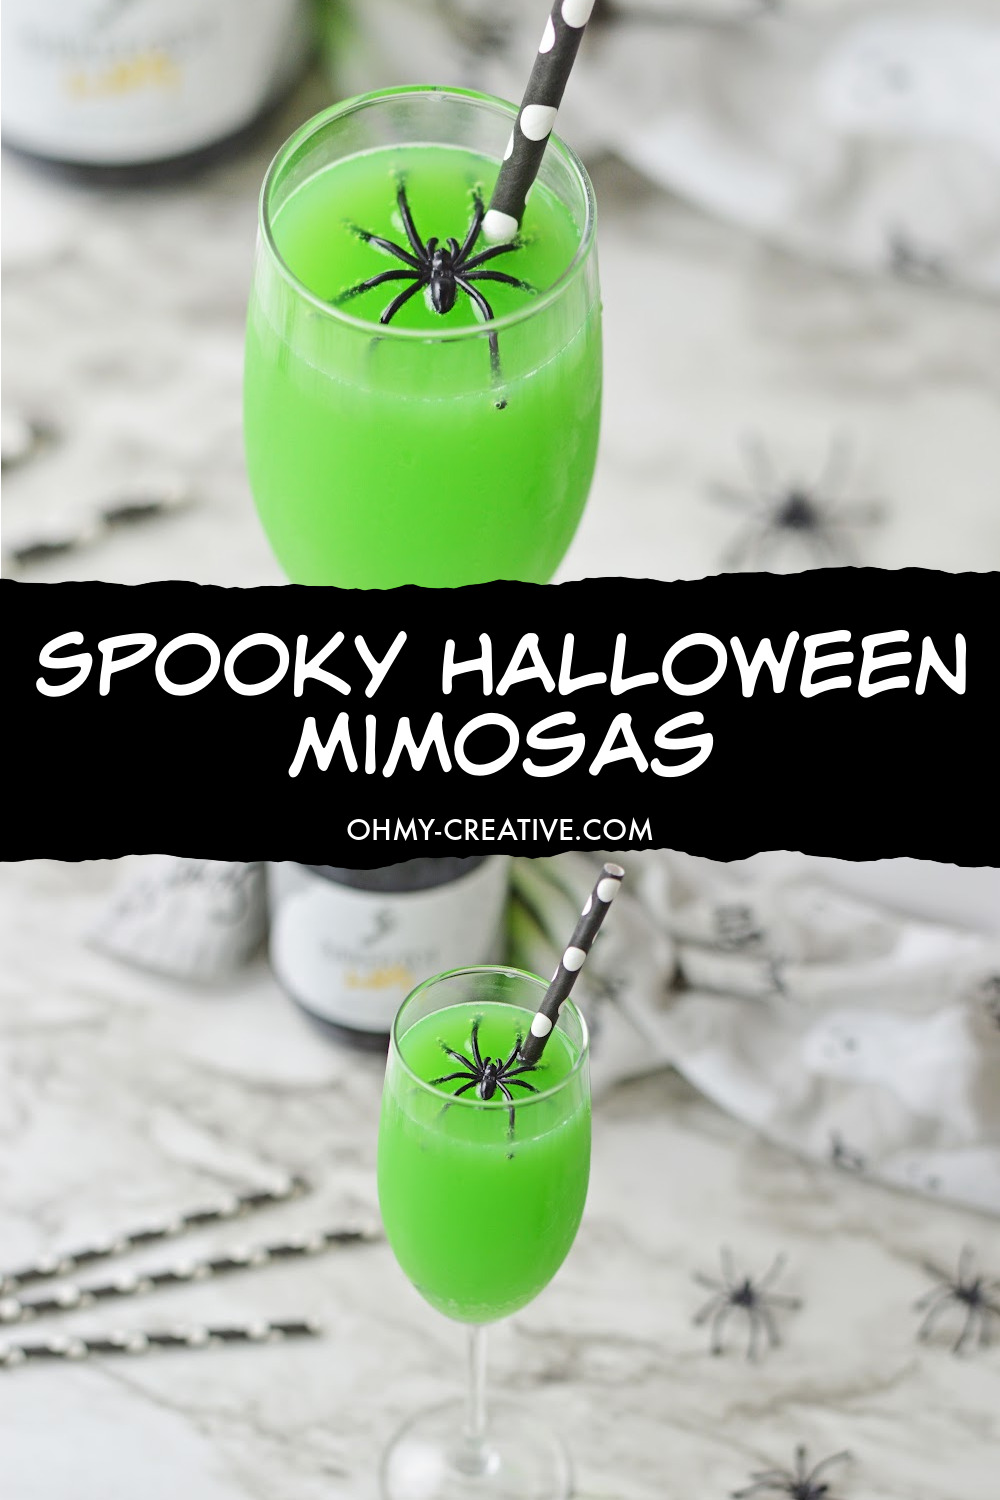 These spooky Halloween Mimosas are displayed on a black and gray marble background with creepy spiders and black and white straws in the background.